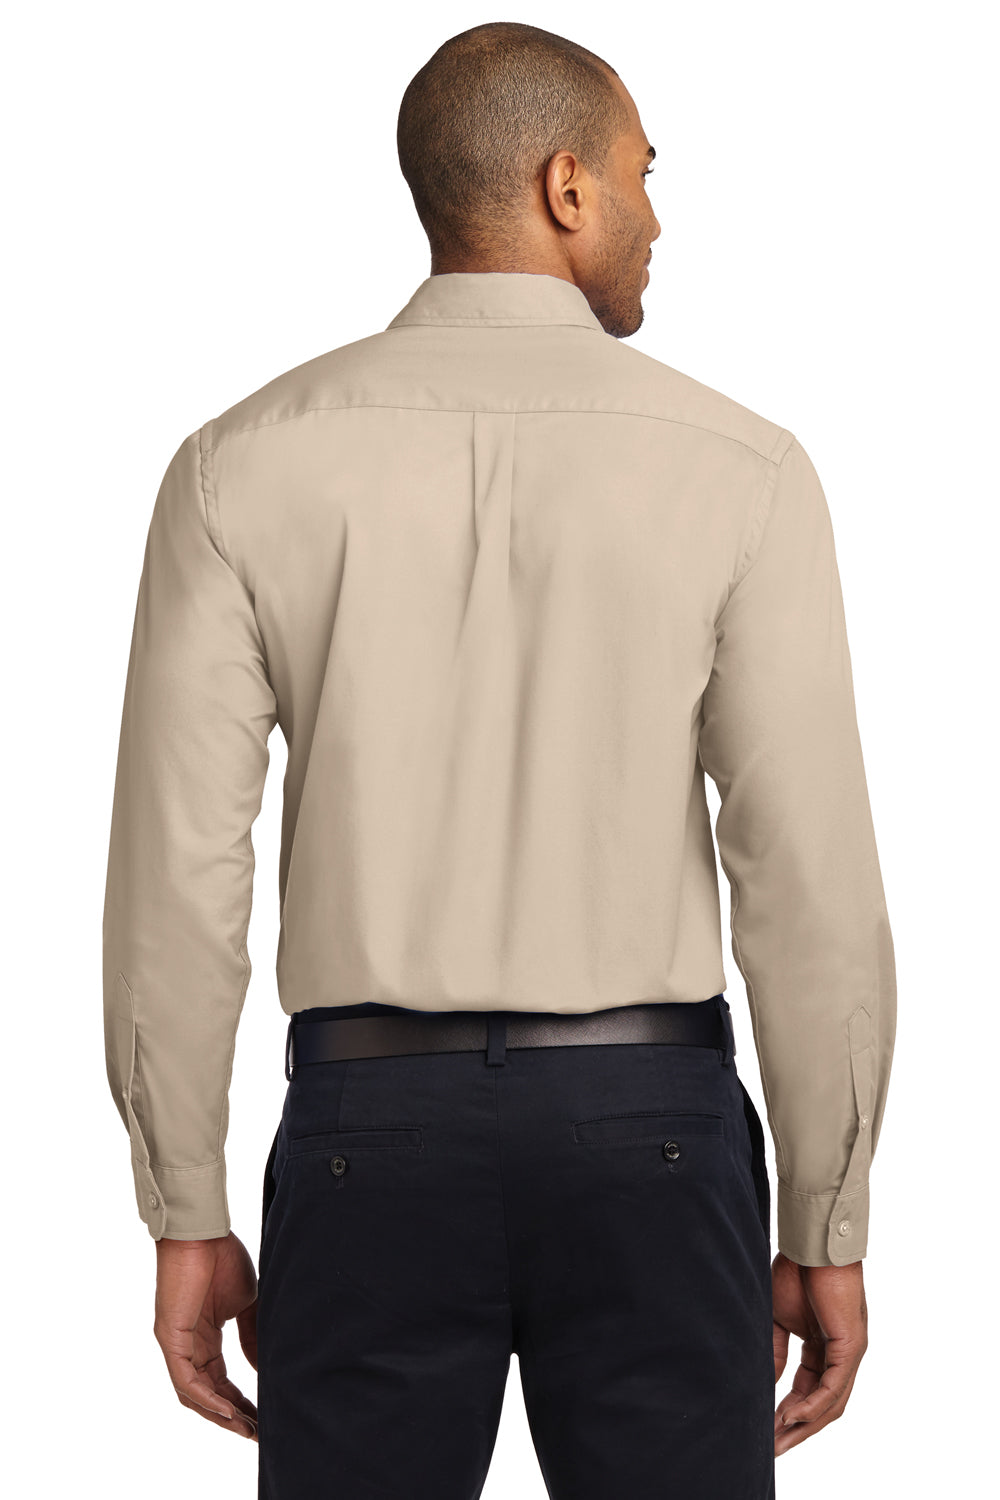 Port Authority S608/TLS608/S608ES Mens Easy Care Wrinkle Resistant Long Sleeve Button Down Shirt w/ Pocket Stone Back